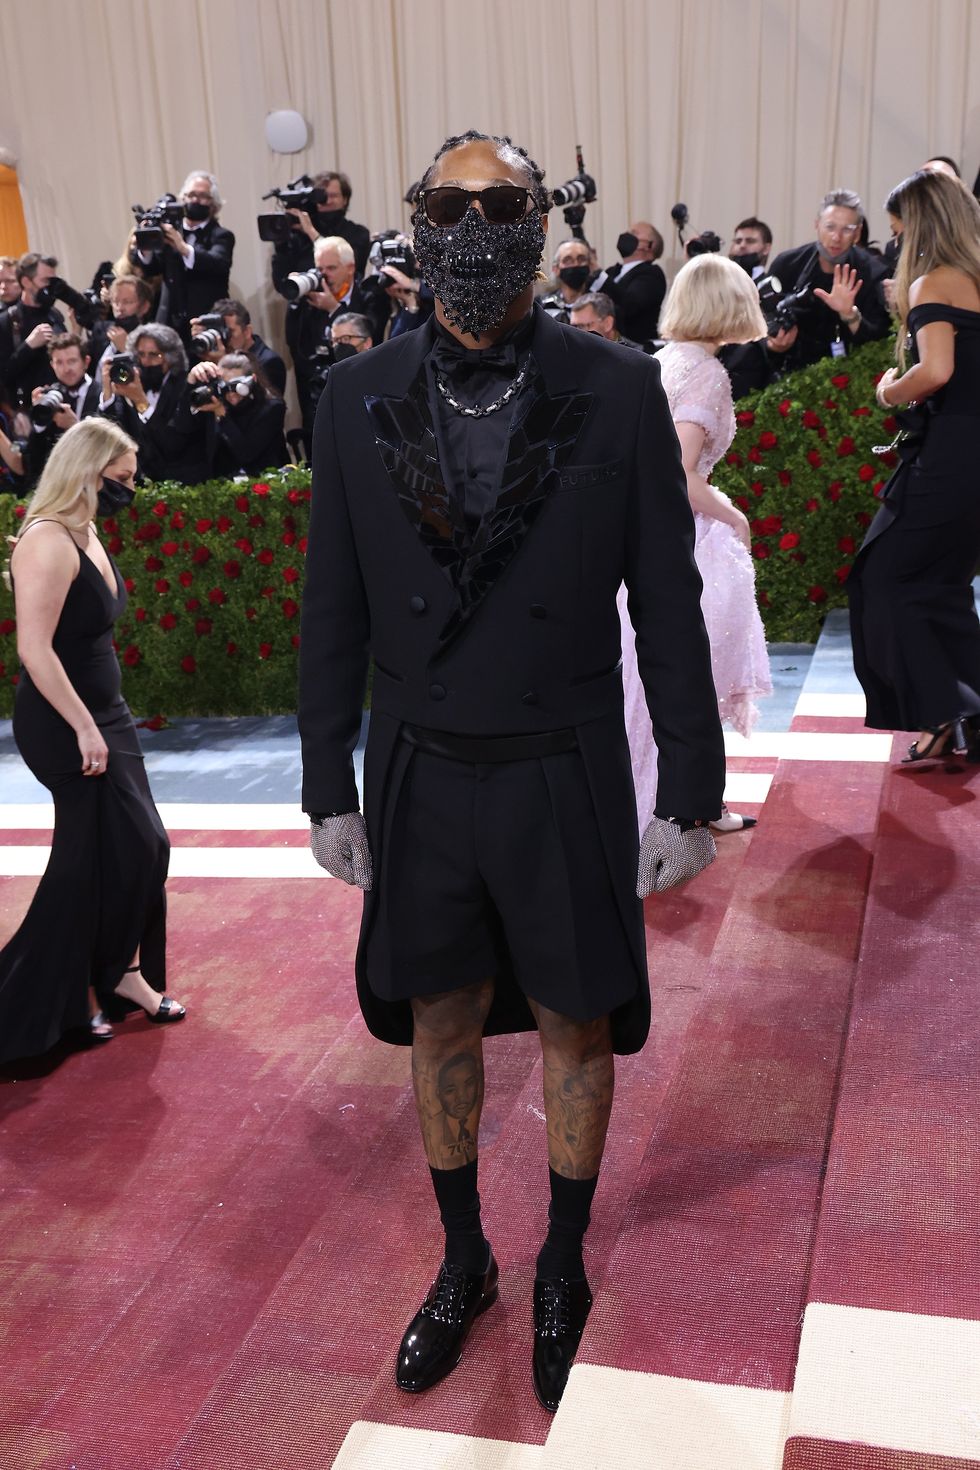 The best and biggest looks from the men at the Met Gala